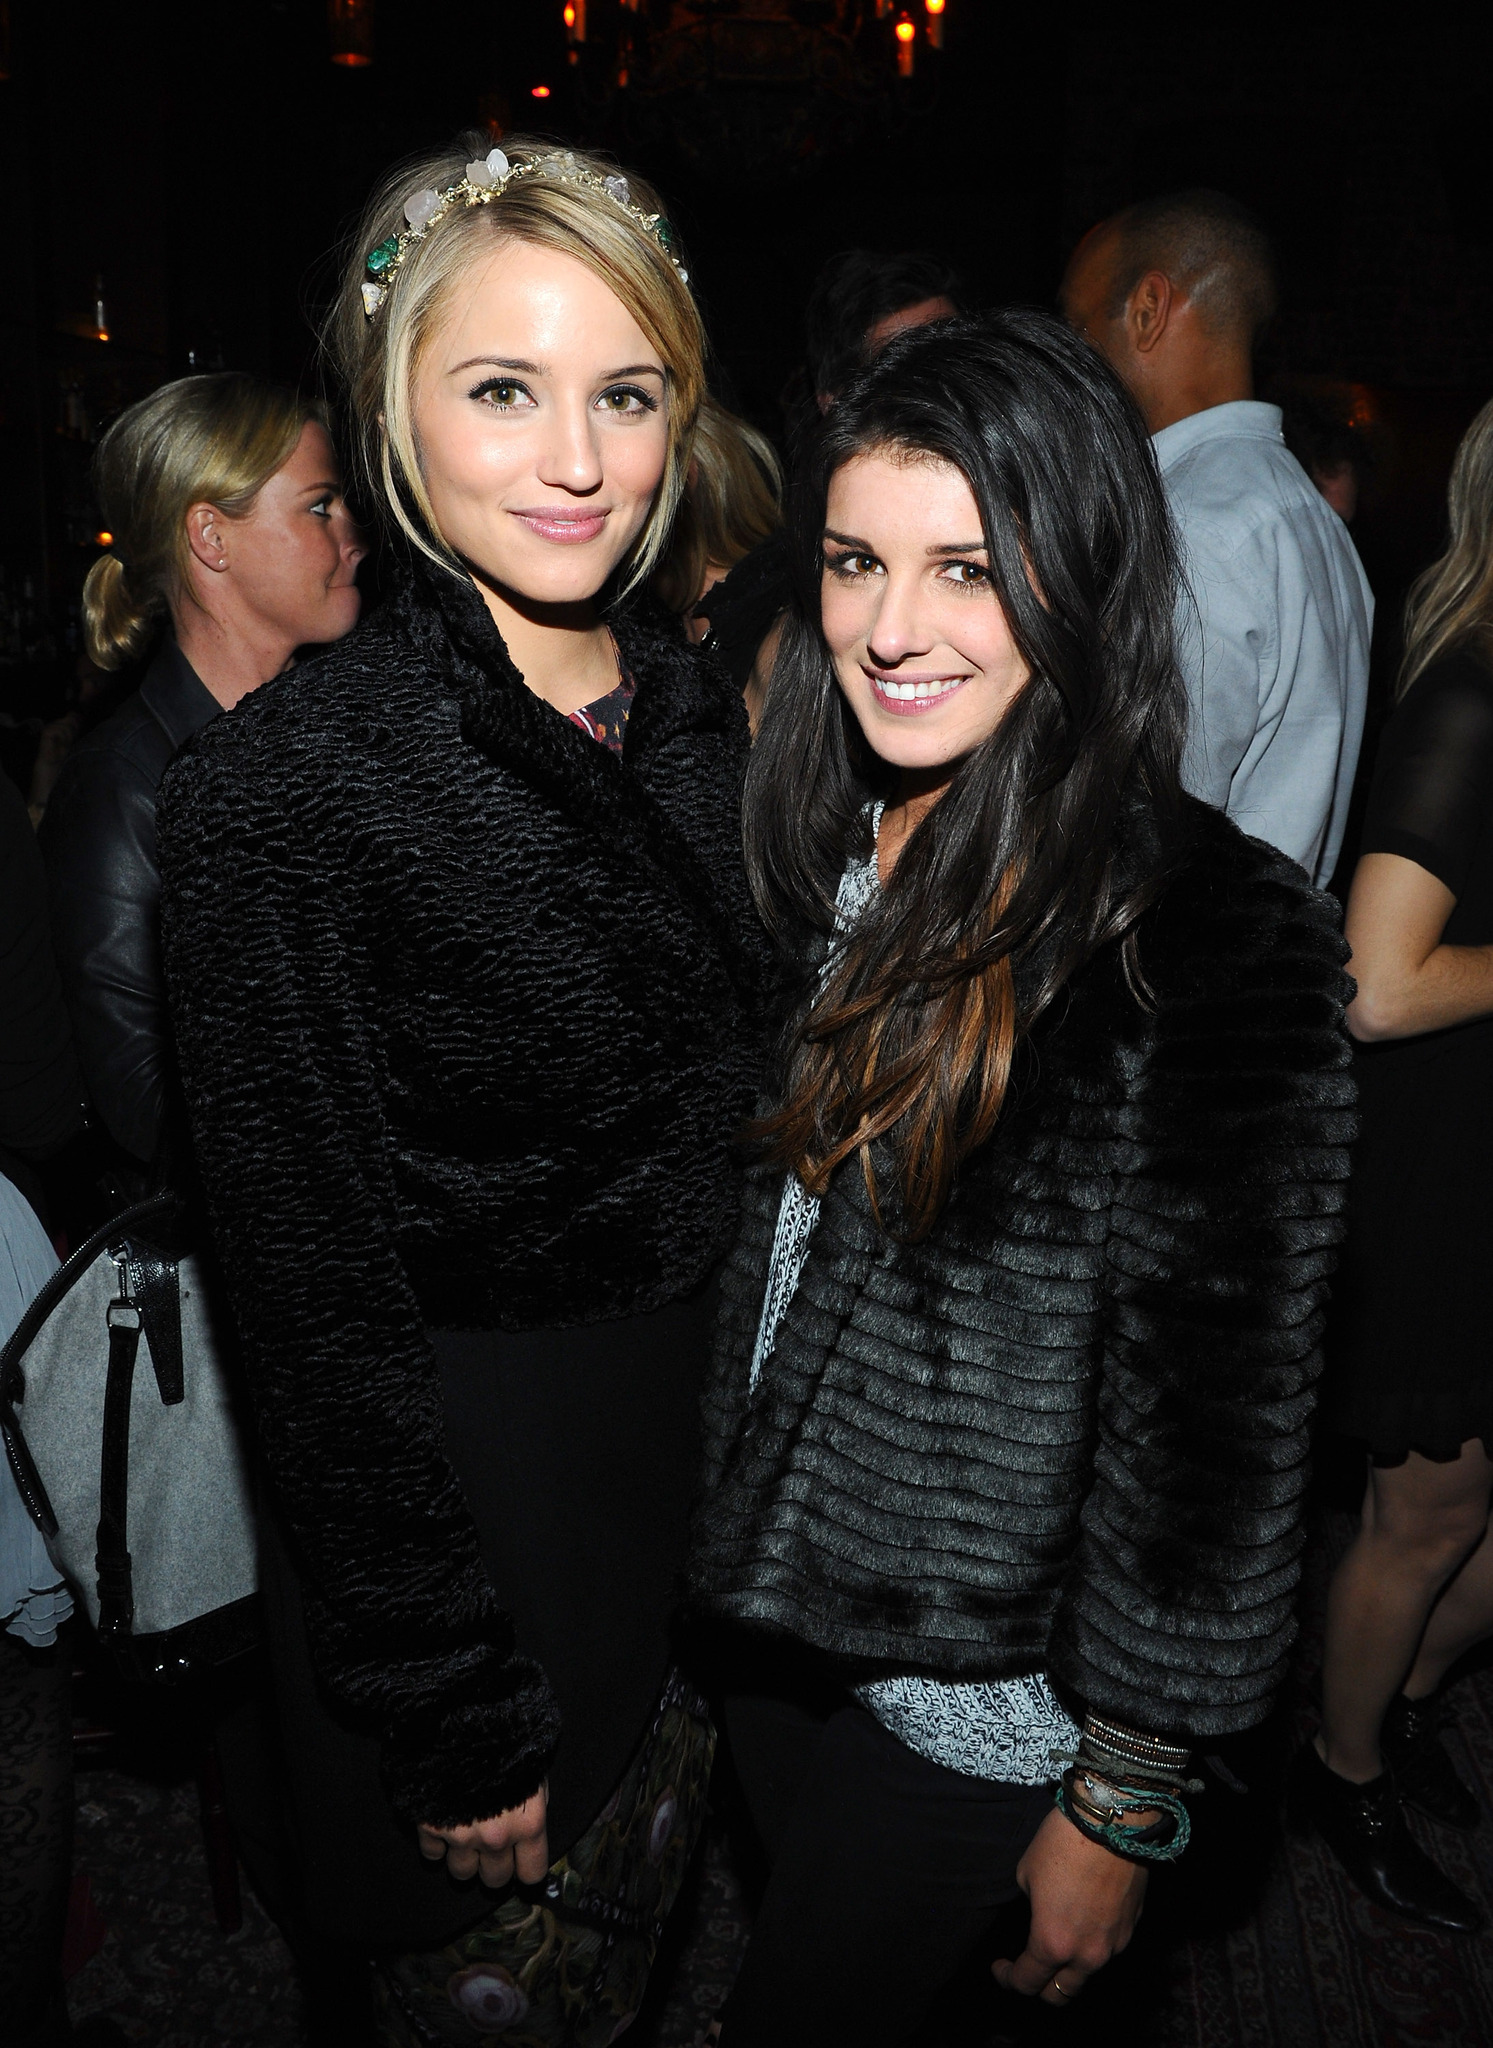 Shenae Grimes-Beech and Dianna Agron